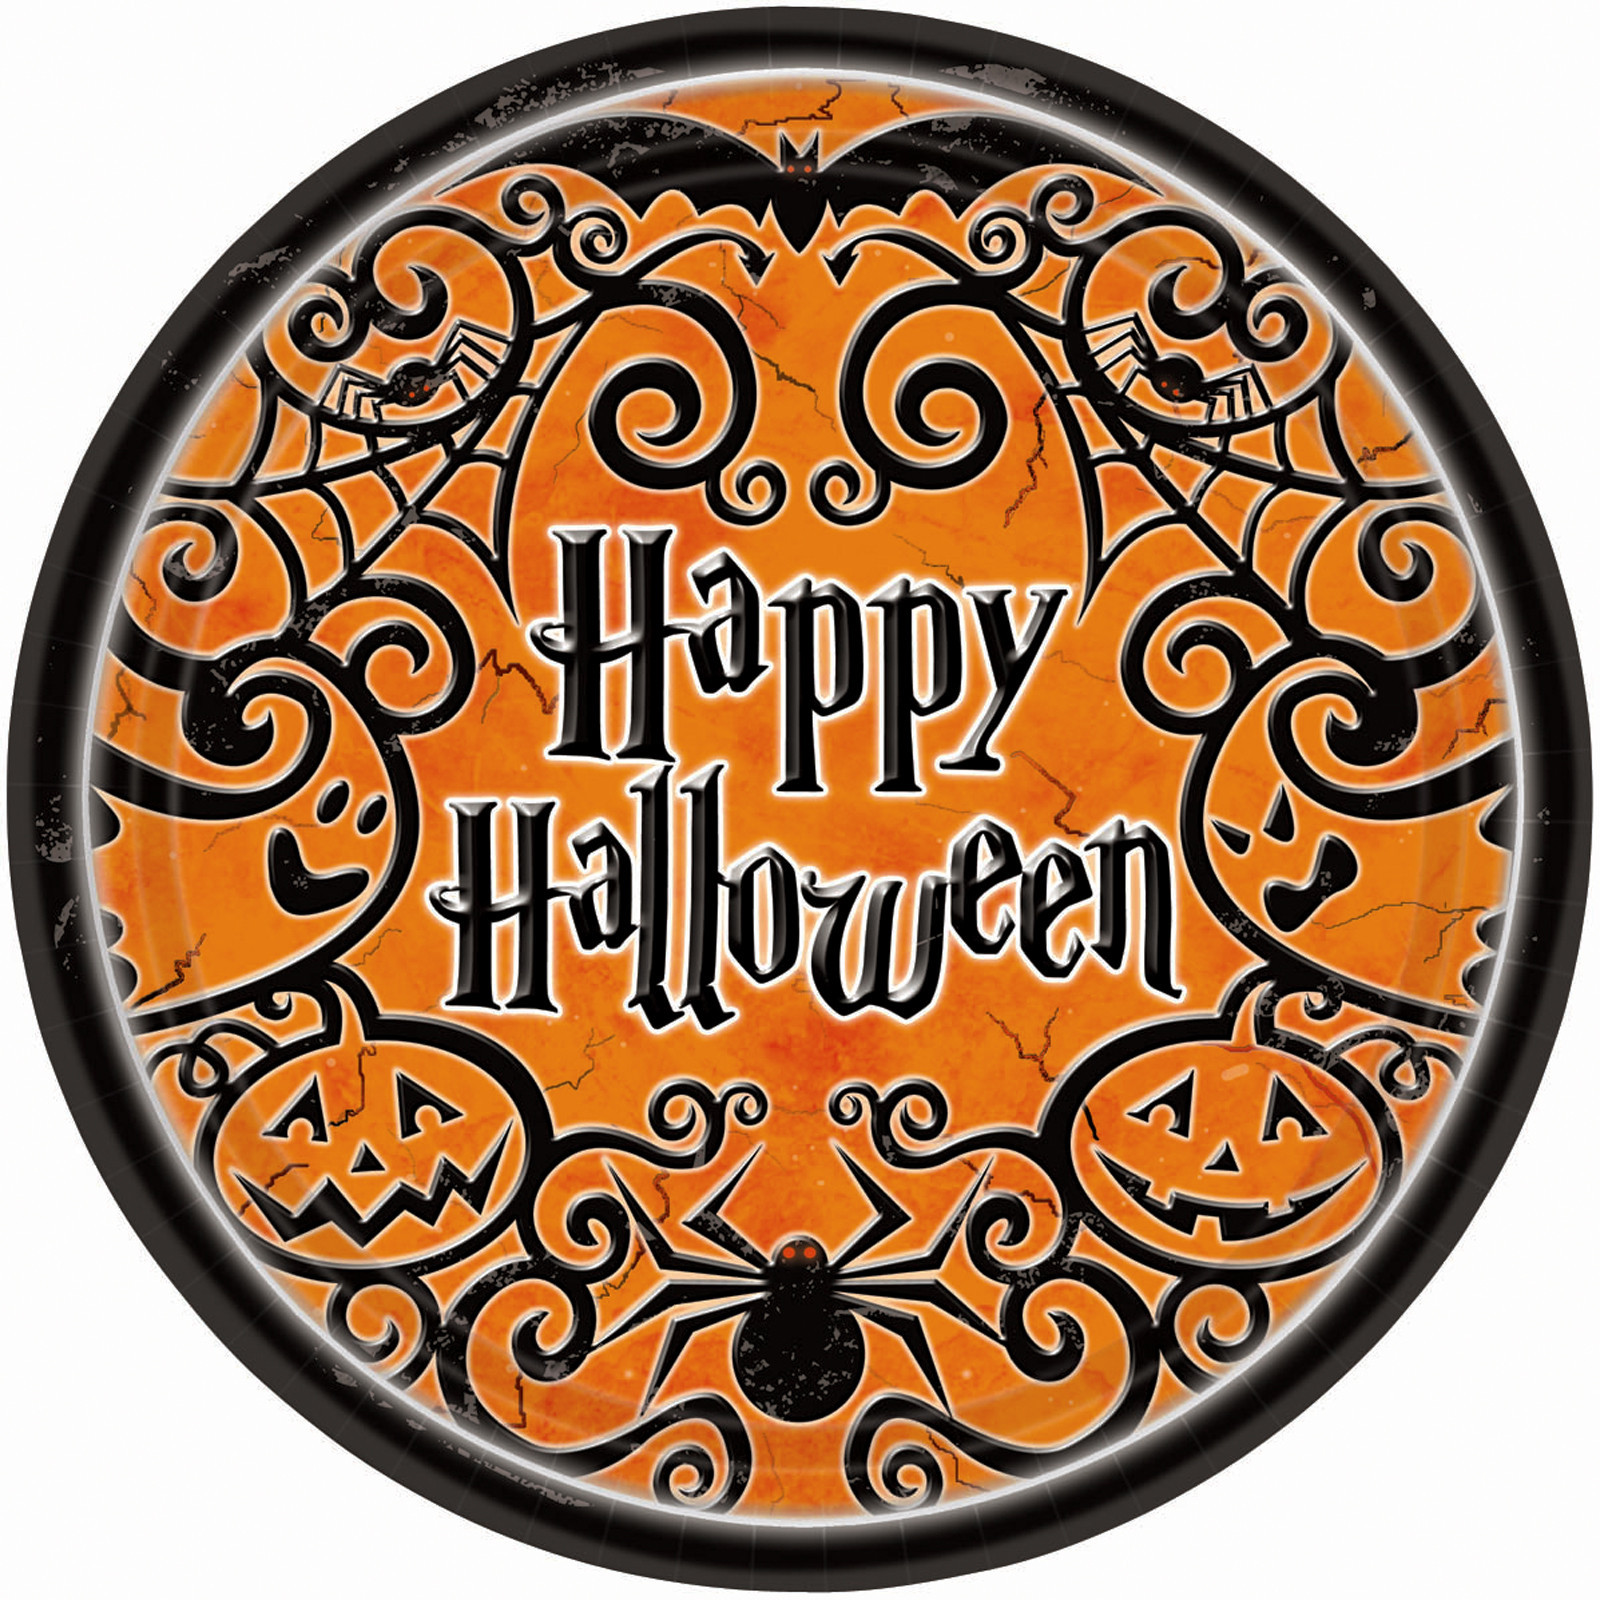 Halloween Dinner Plates
 The top 22 Ideas About Halloween Dinner Plates Most